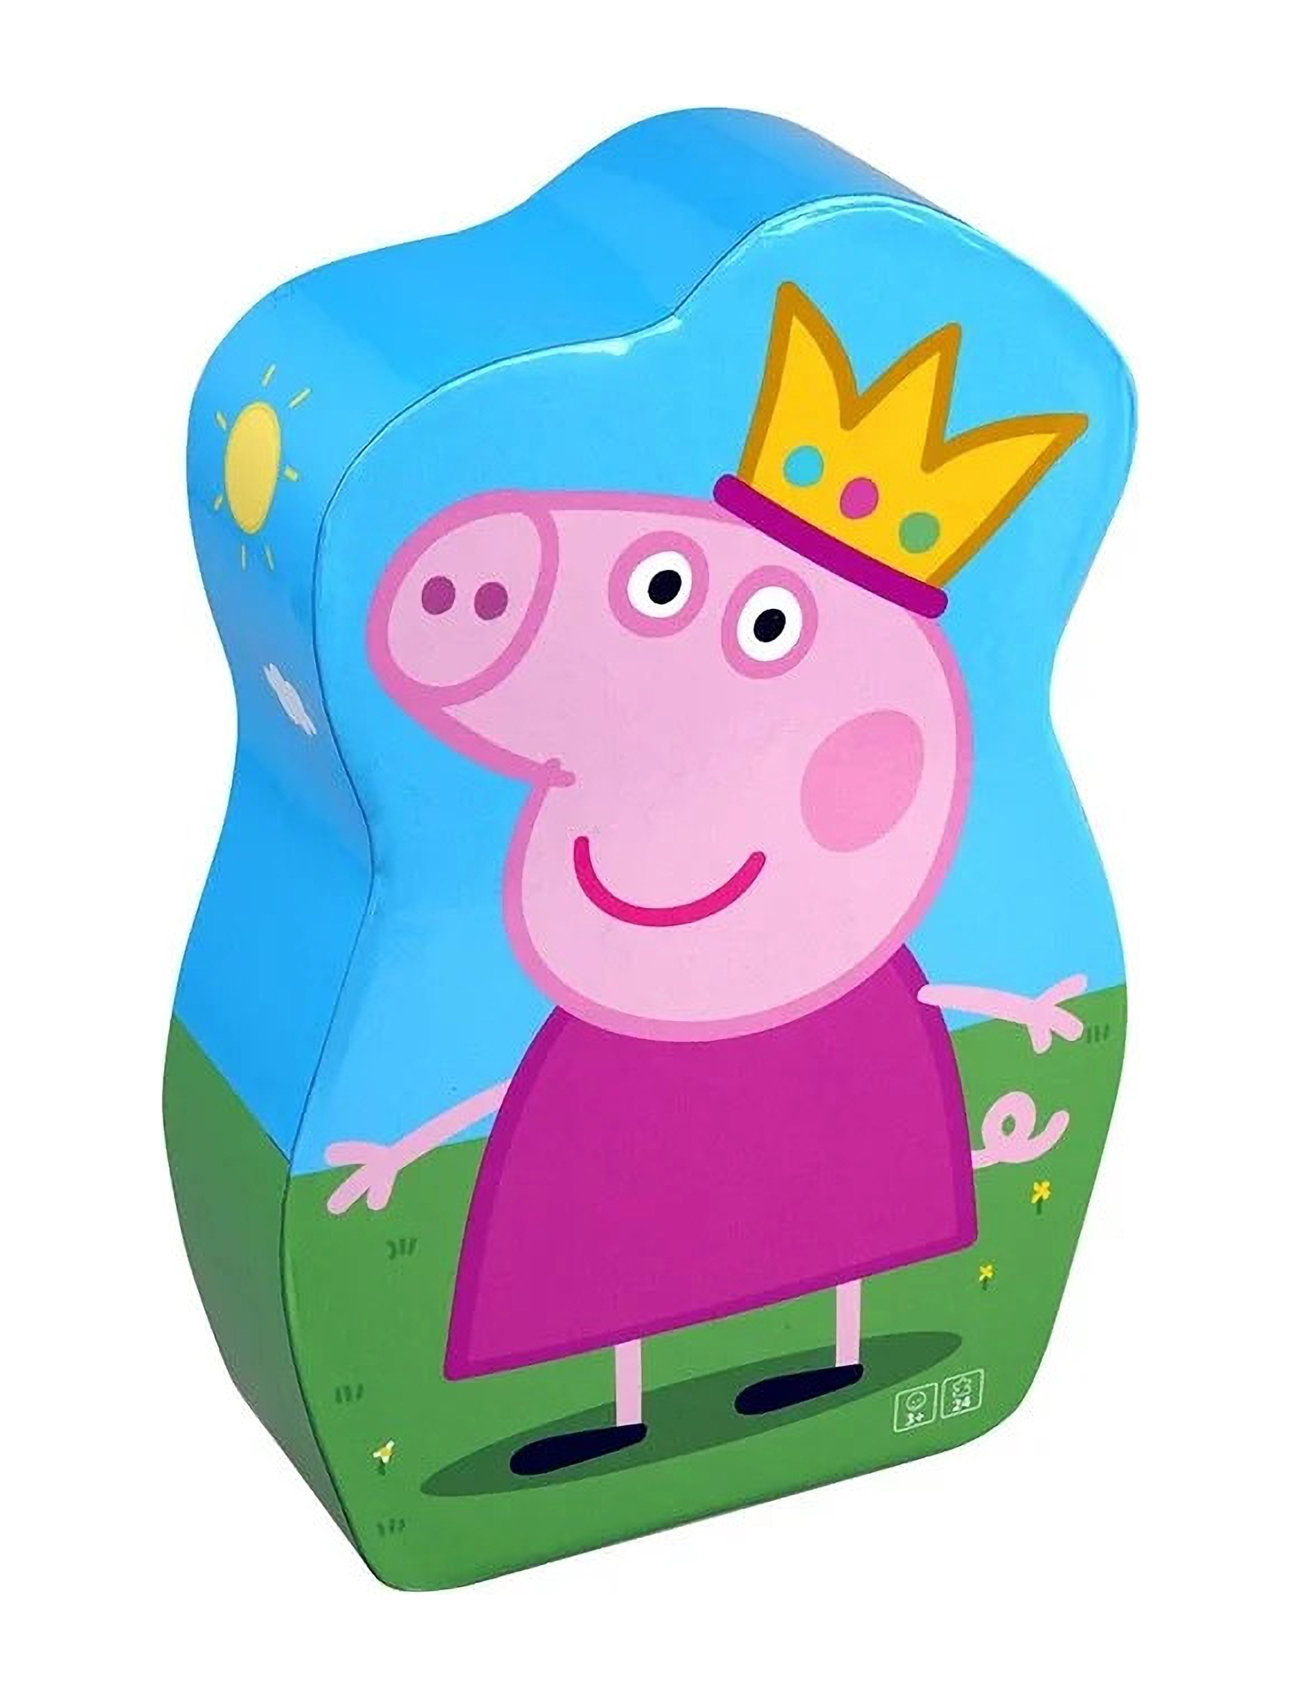 Peppa Pig Shaped Puzzle Princess Toys Puzzles And Games Puzzles Classic Puzzles Multi/patterned Gurli Gris